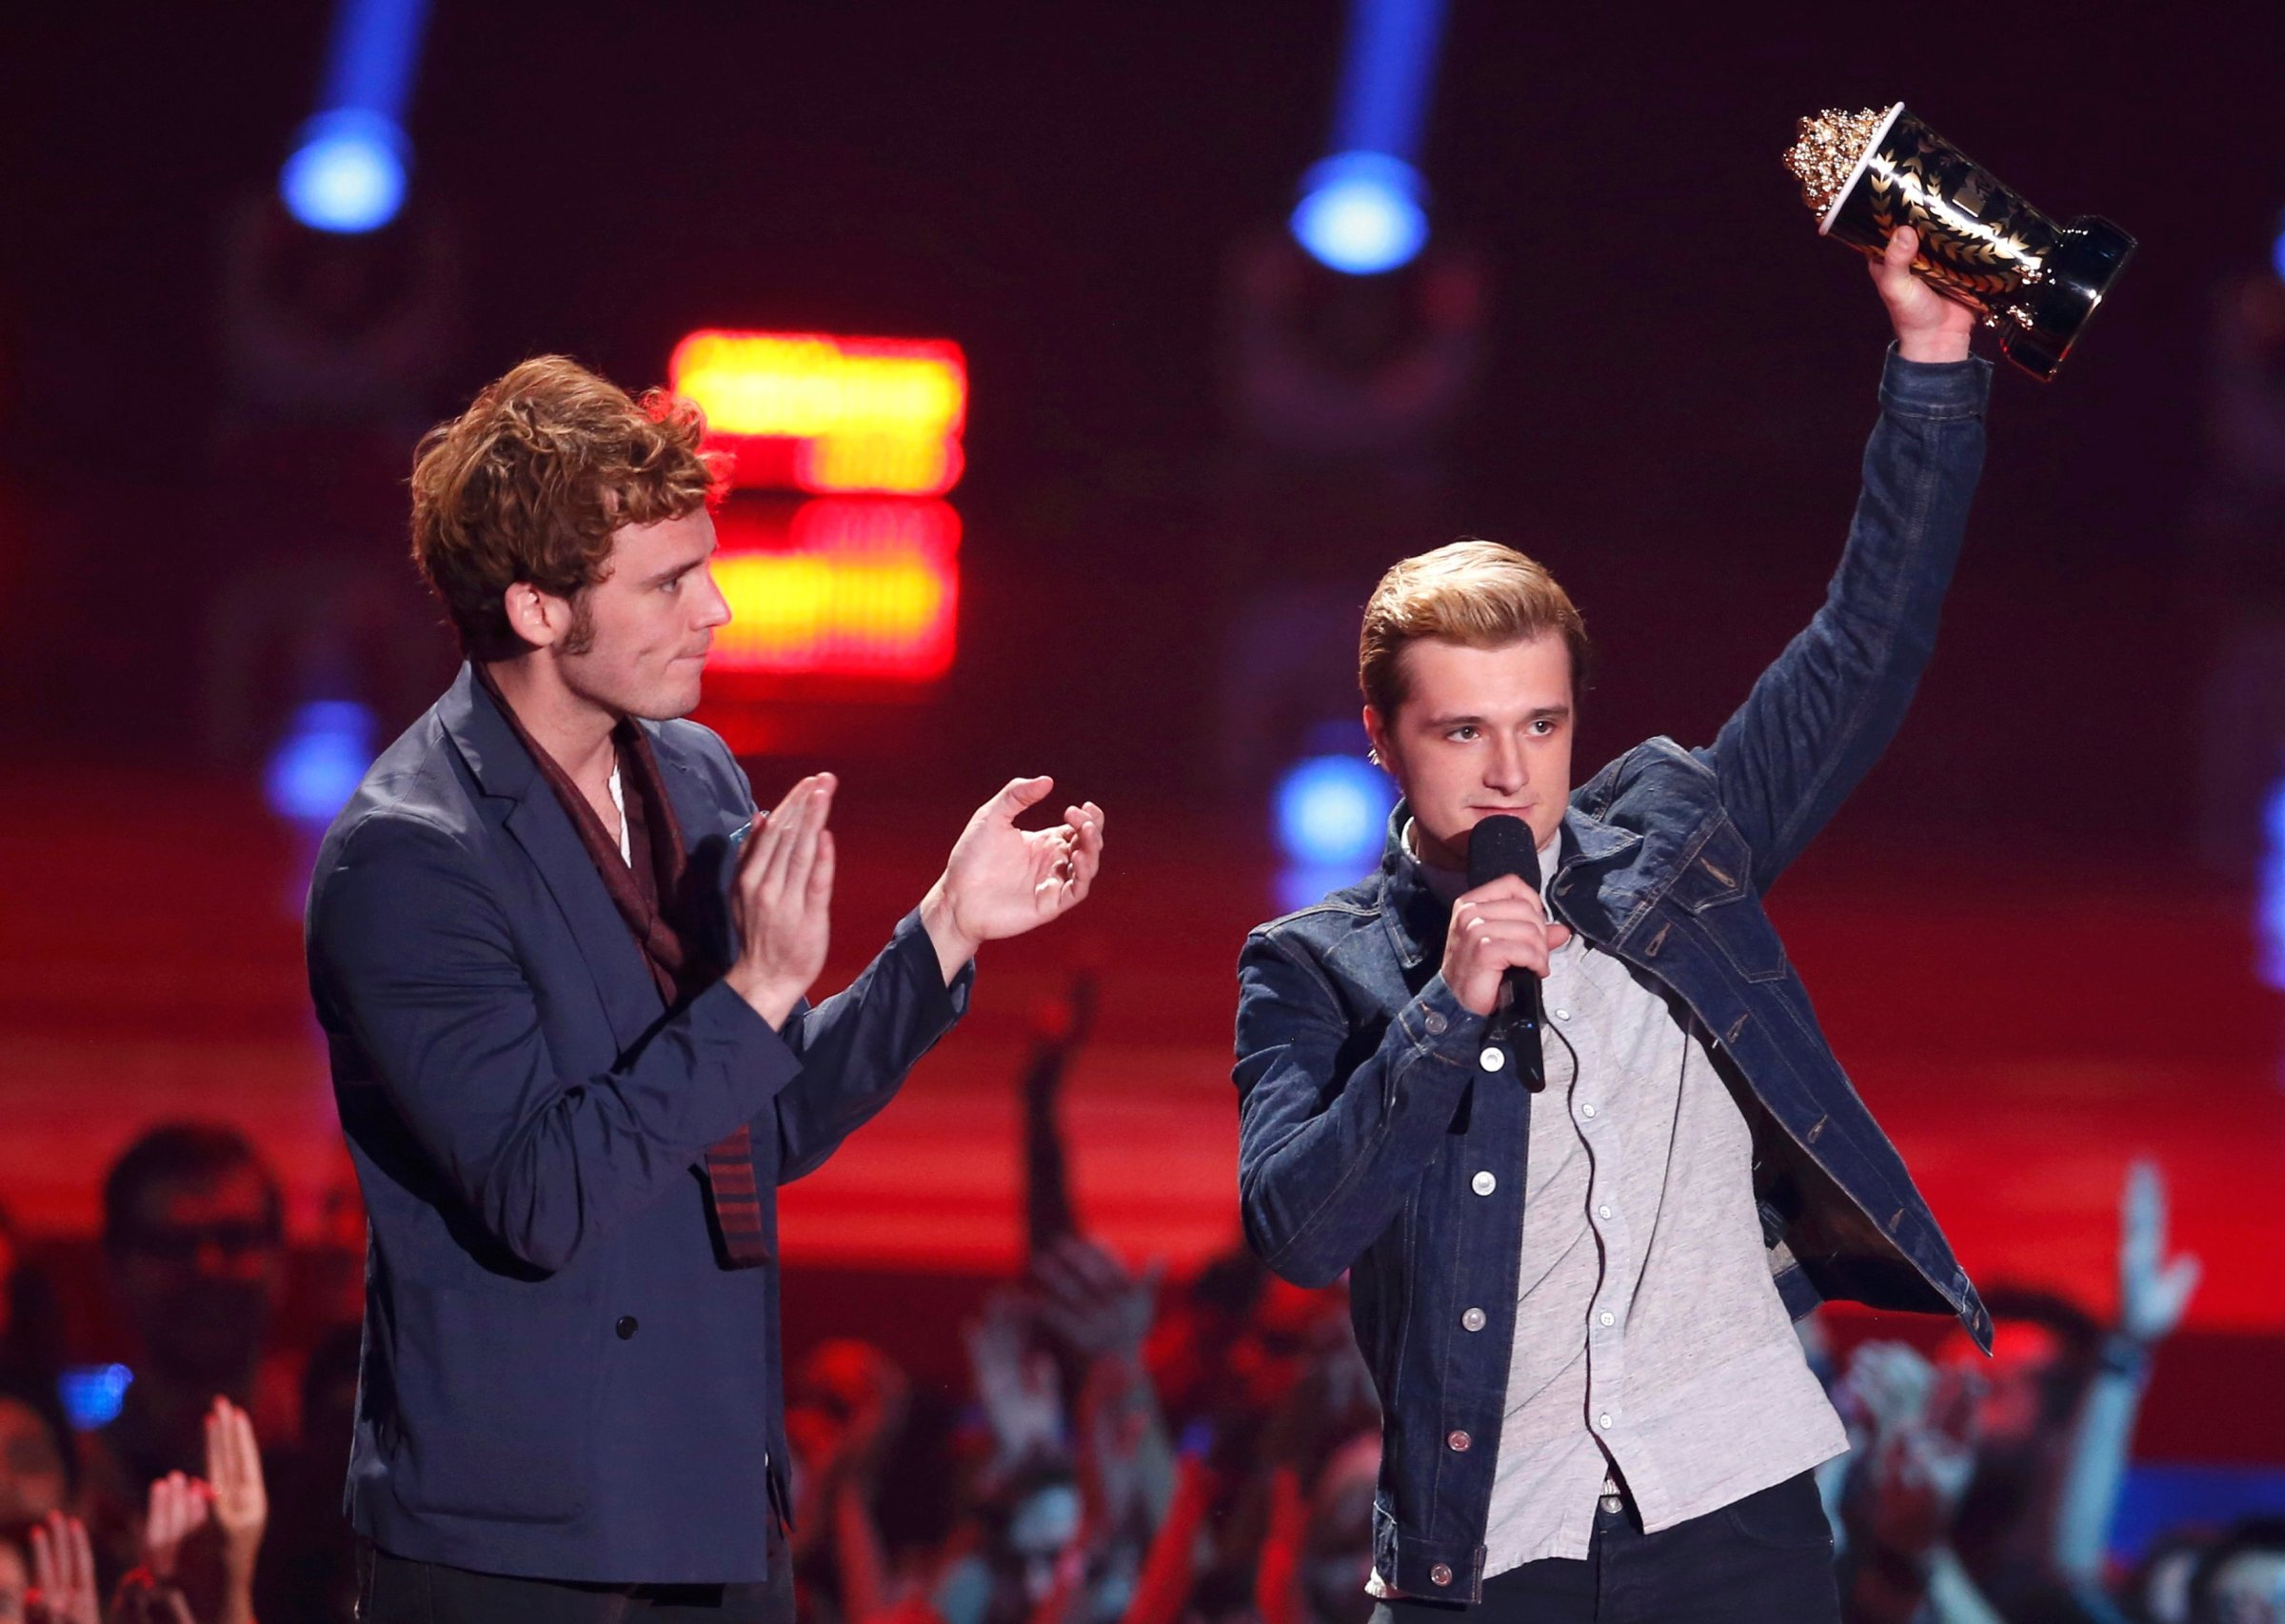 From left: Sam Claflin and Josh Hutcherson accept the award for Best Movie of the Year for "The Hunger Games: Catching Fire" at the 2014 MTV Movie Awards in Los Angeles, on April 13, 2014.